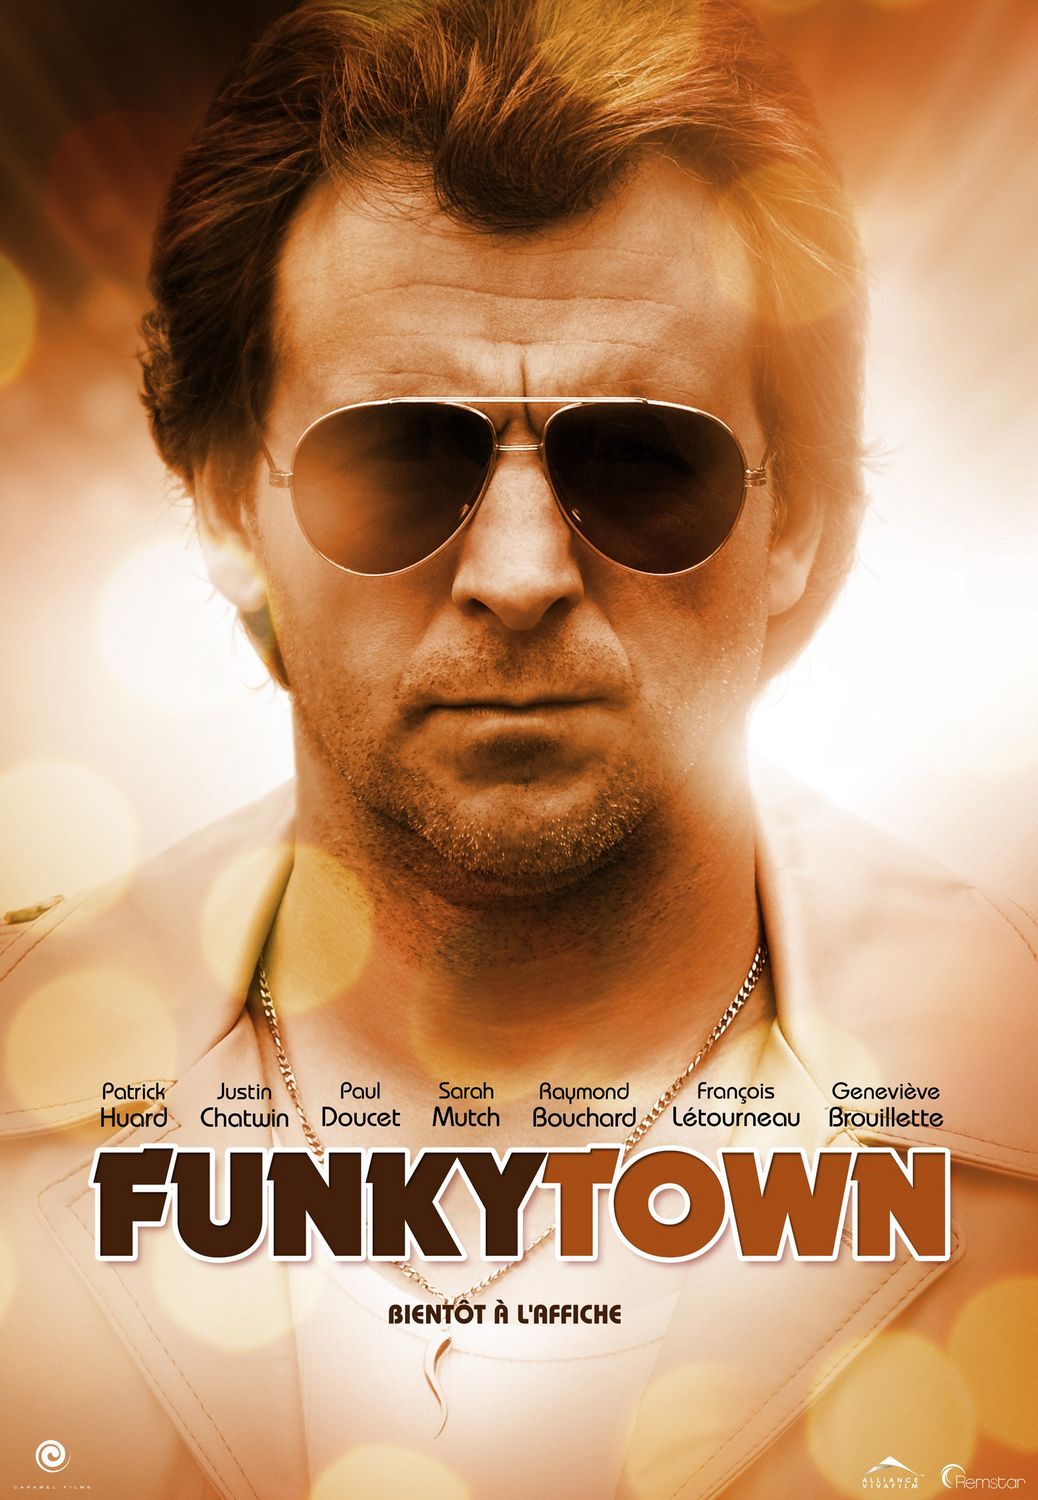 Funky Town movie